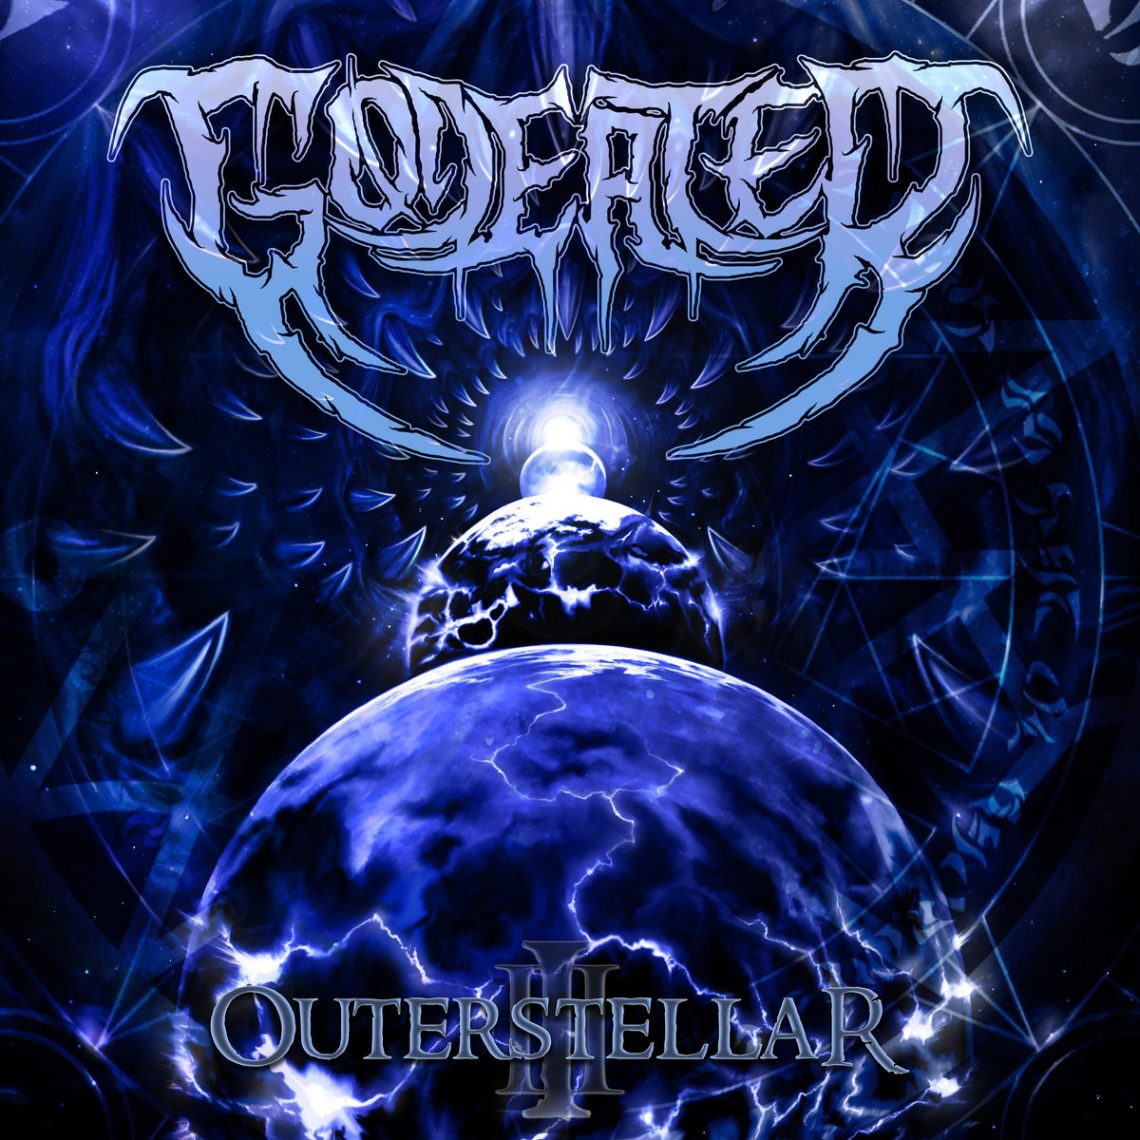 Godeater – Outerstellar